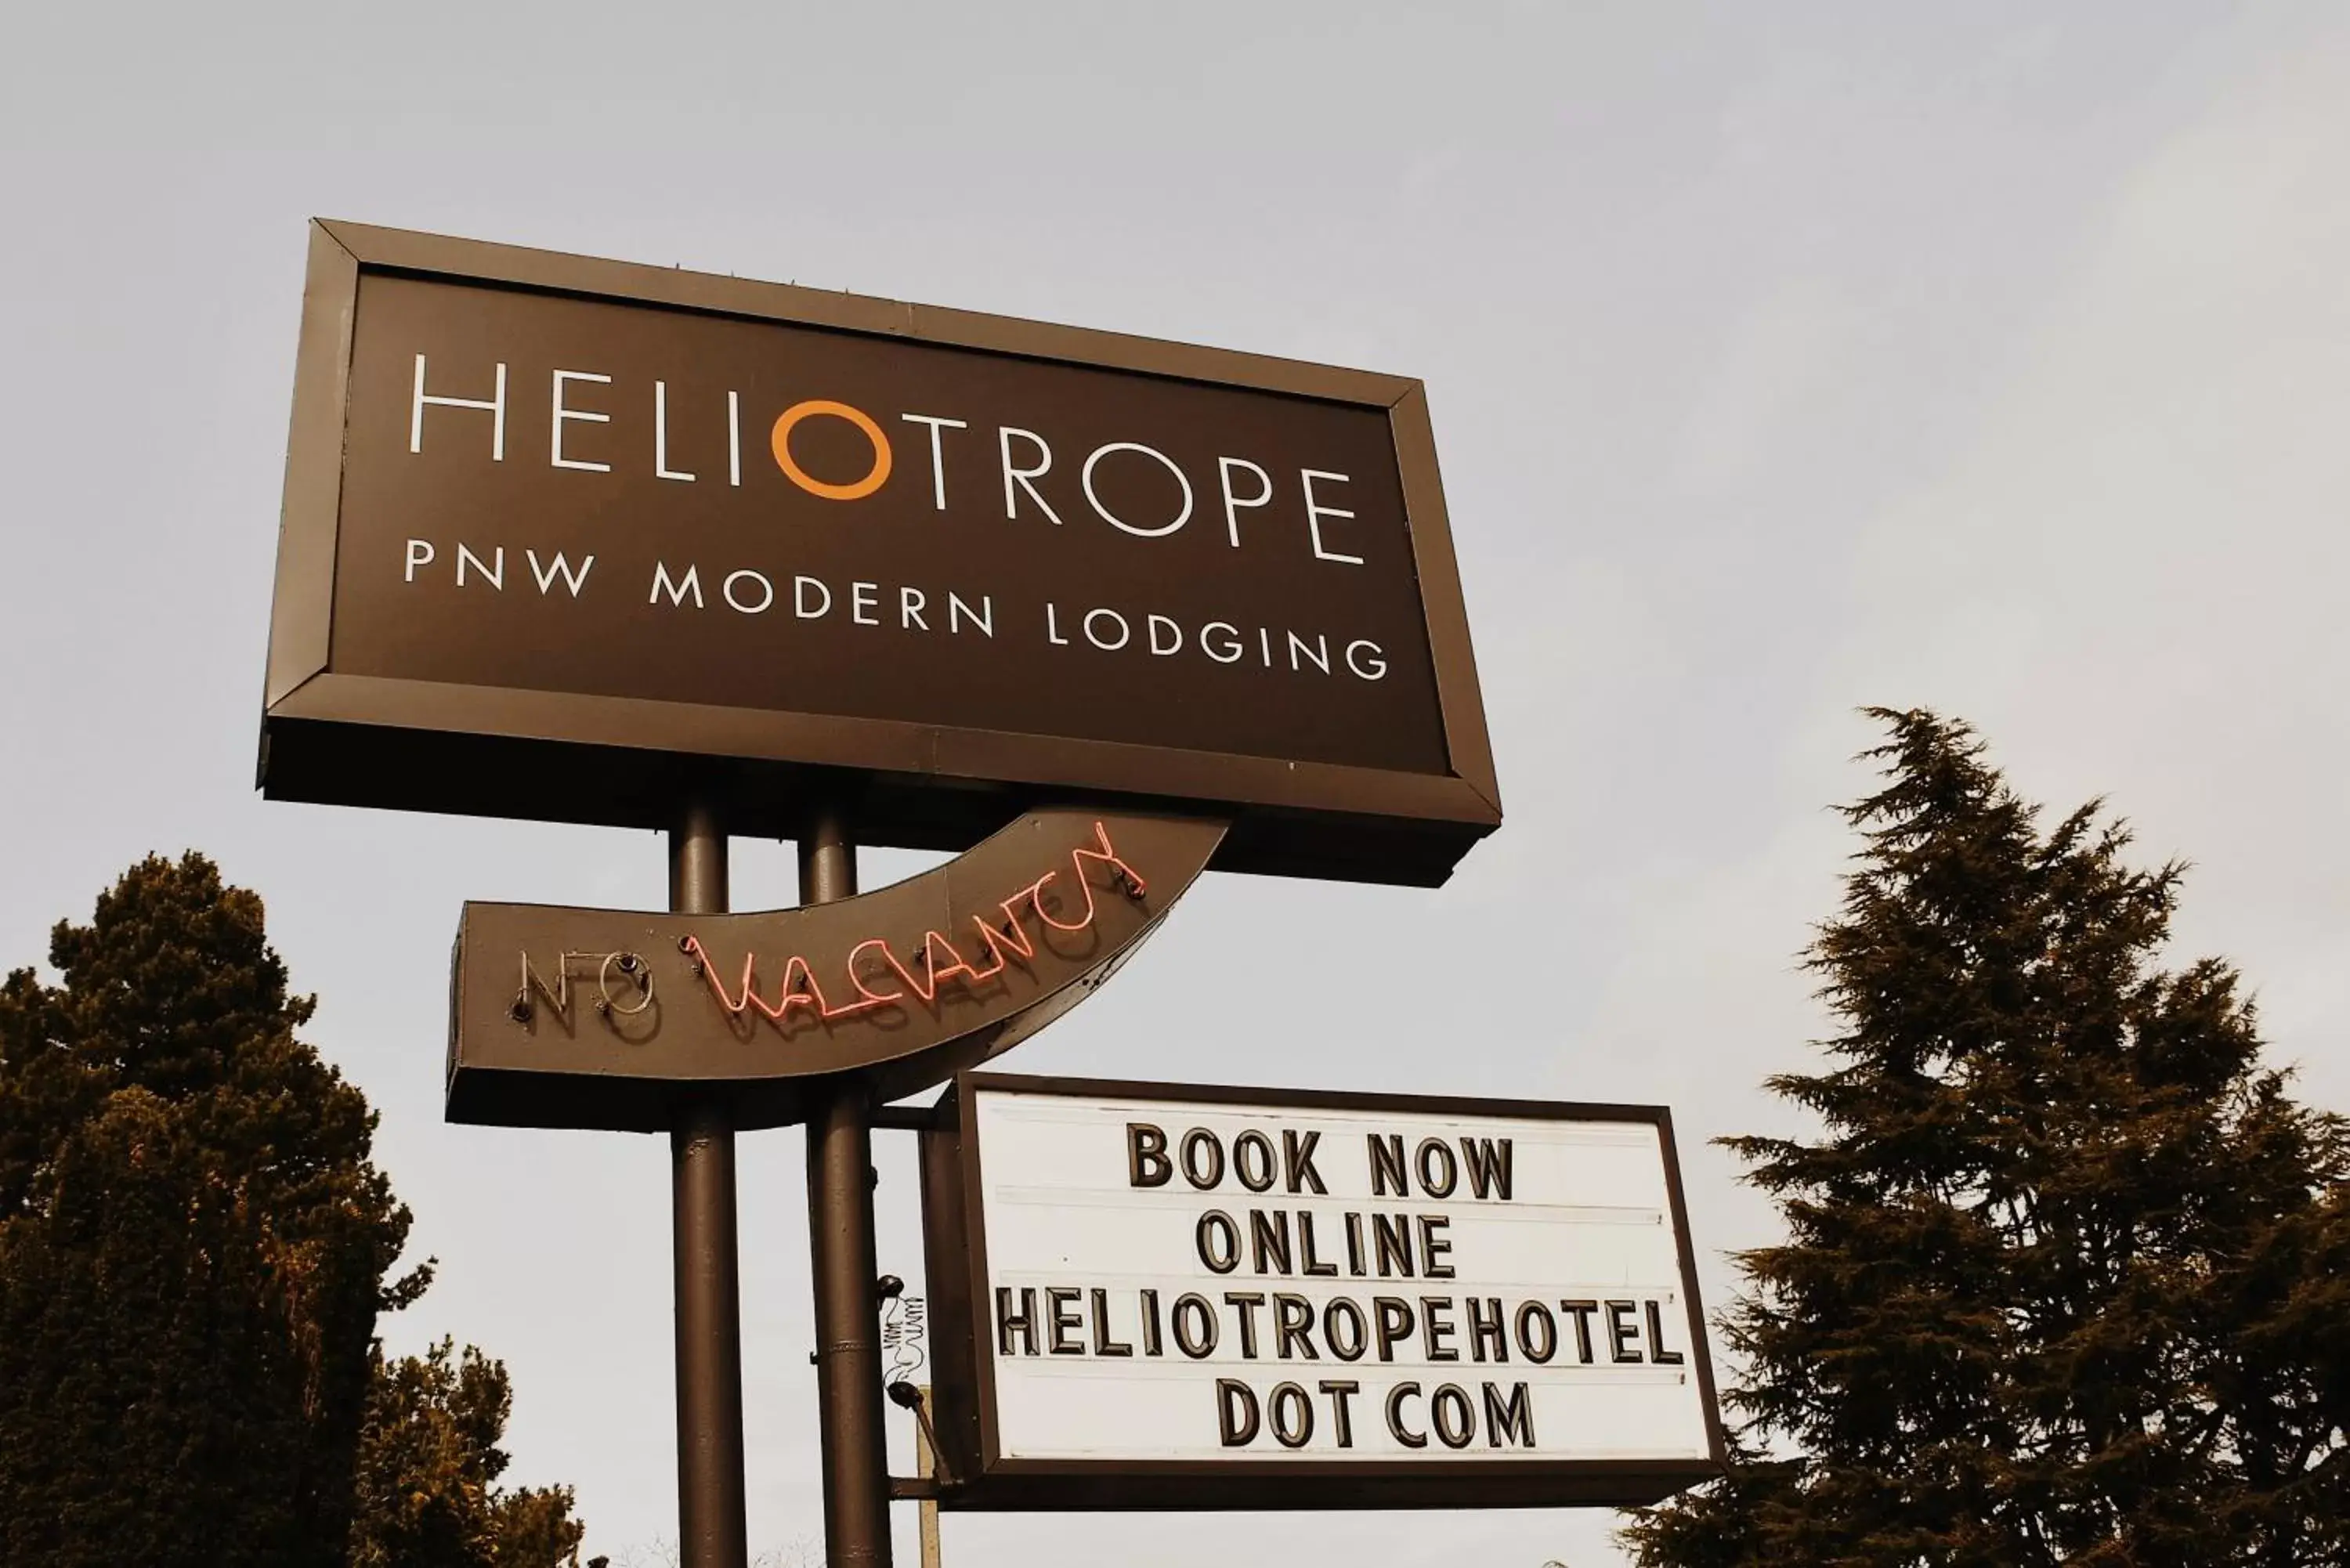 Property logo or sign in Heliotrope Hotel